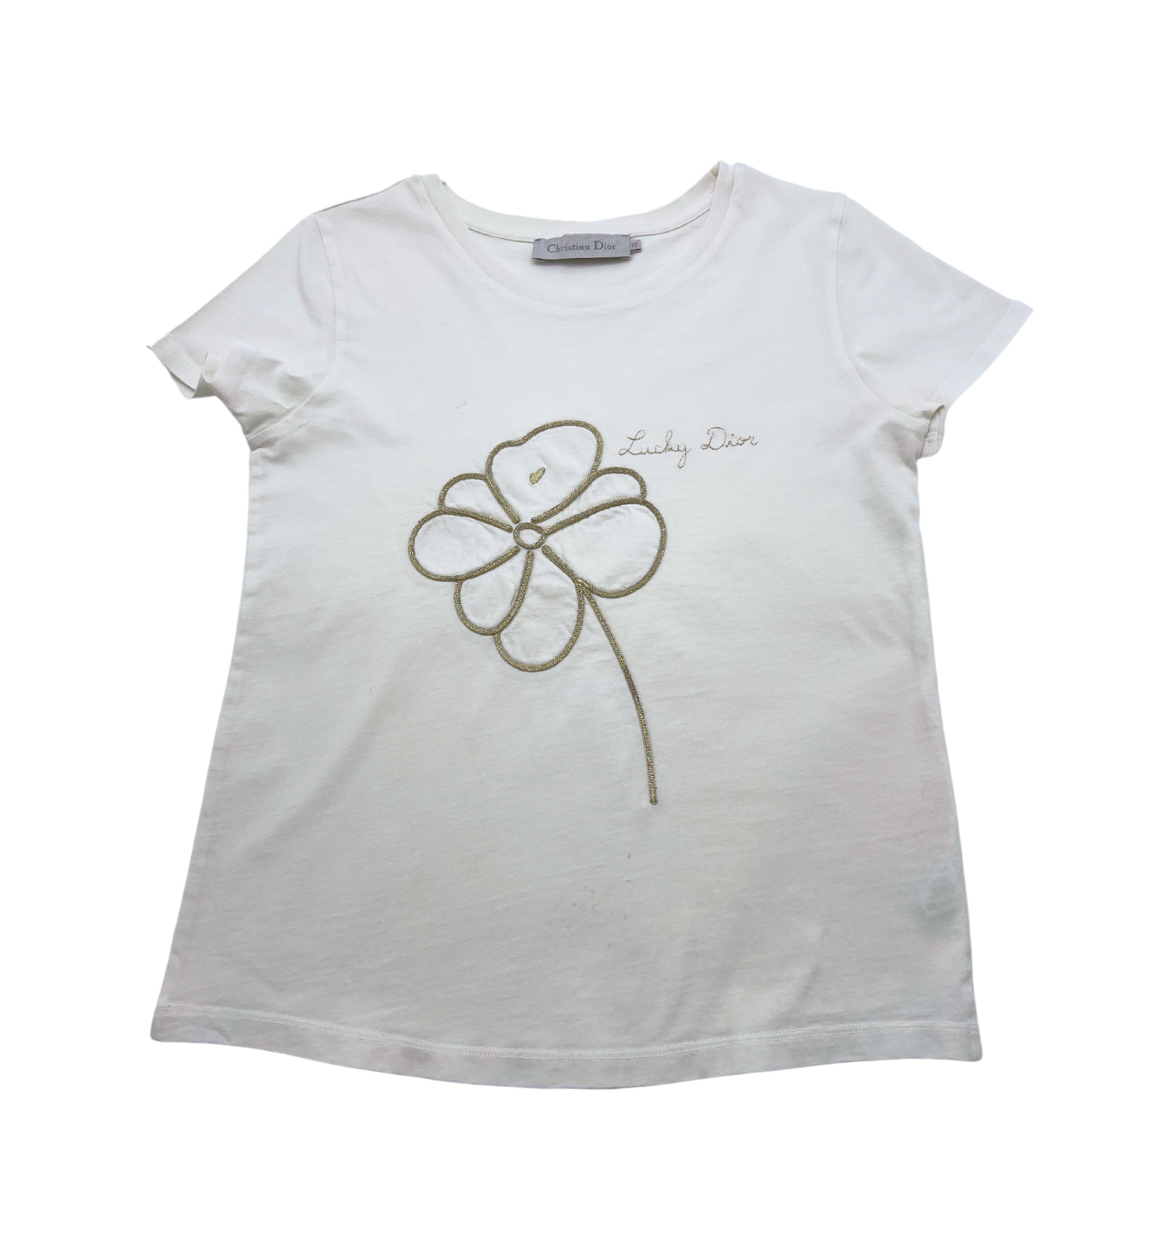 DIOR - "Lucky Dior" T-shirt - 10 years